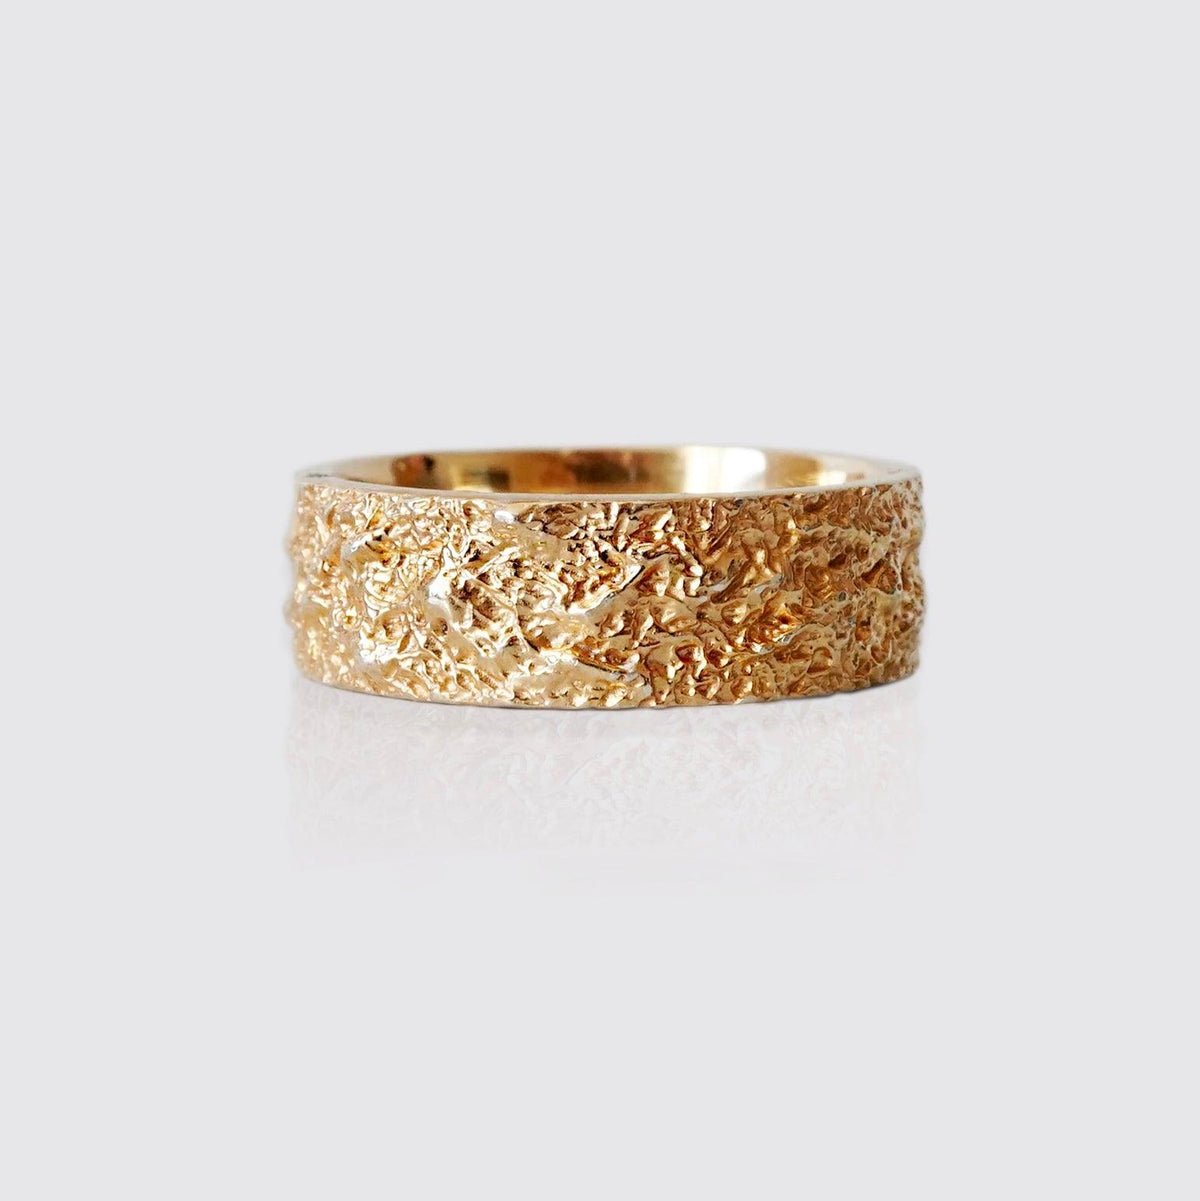 Meteoroid Ring Band in Sterling Silver, 14K and 18K Gold, 7.2mm - Tippy Taste Jewelry